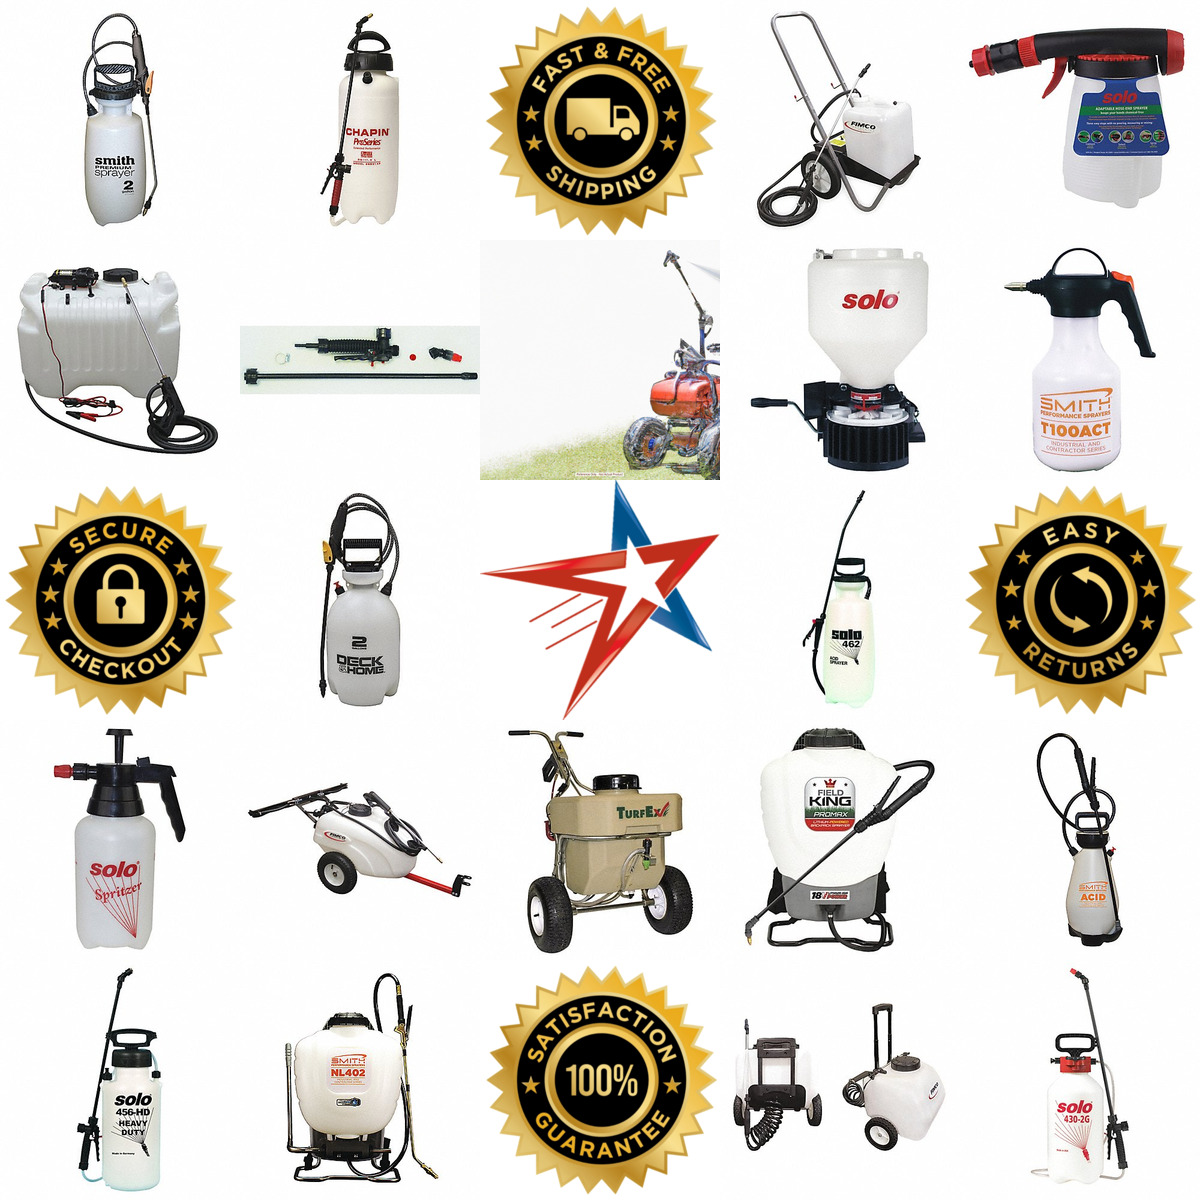 A selection of Lawn Sprayers products on GoVets